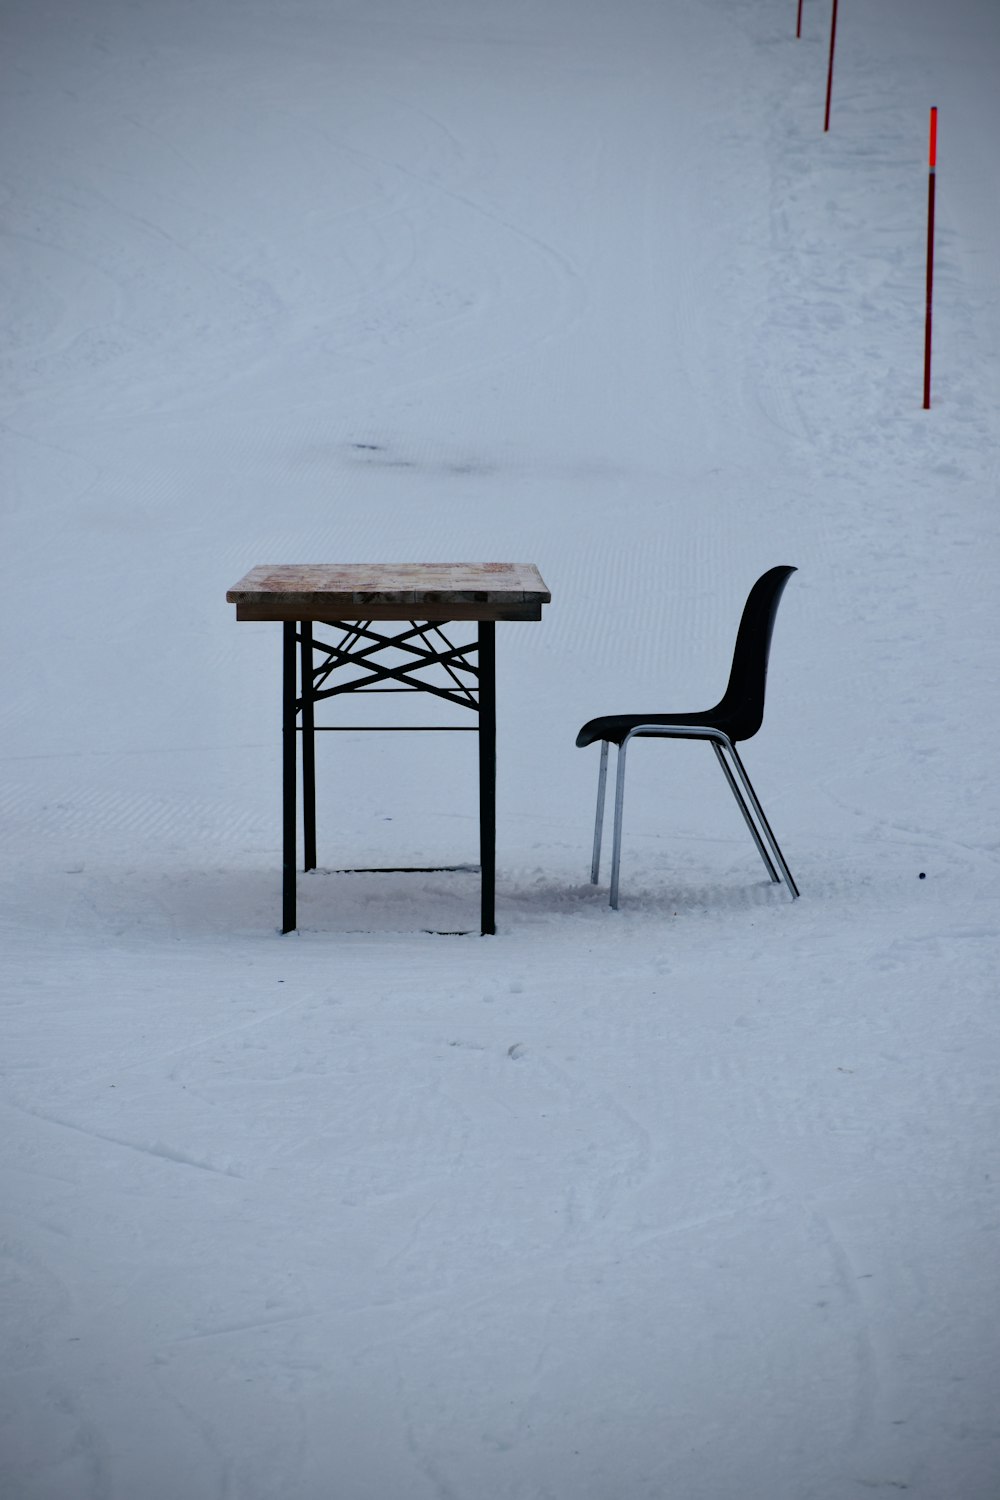 brown wooden table on snow covered ground